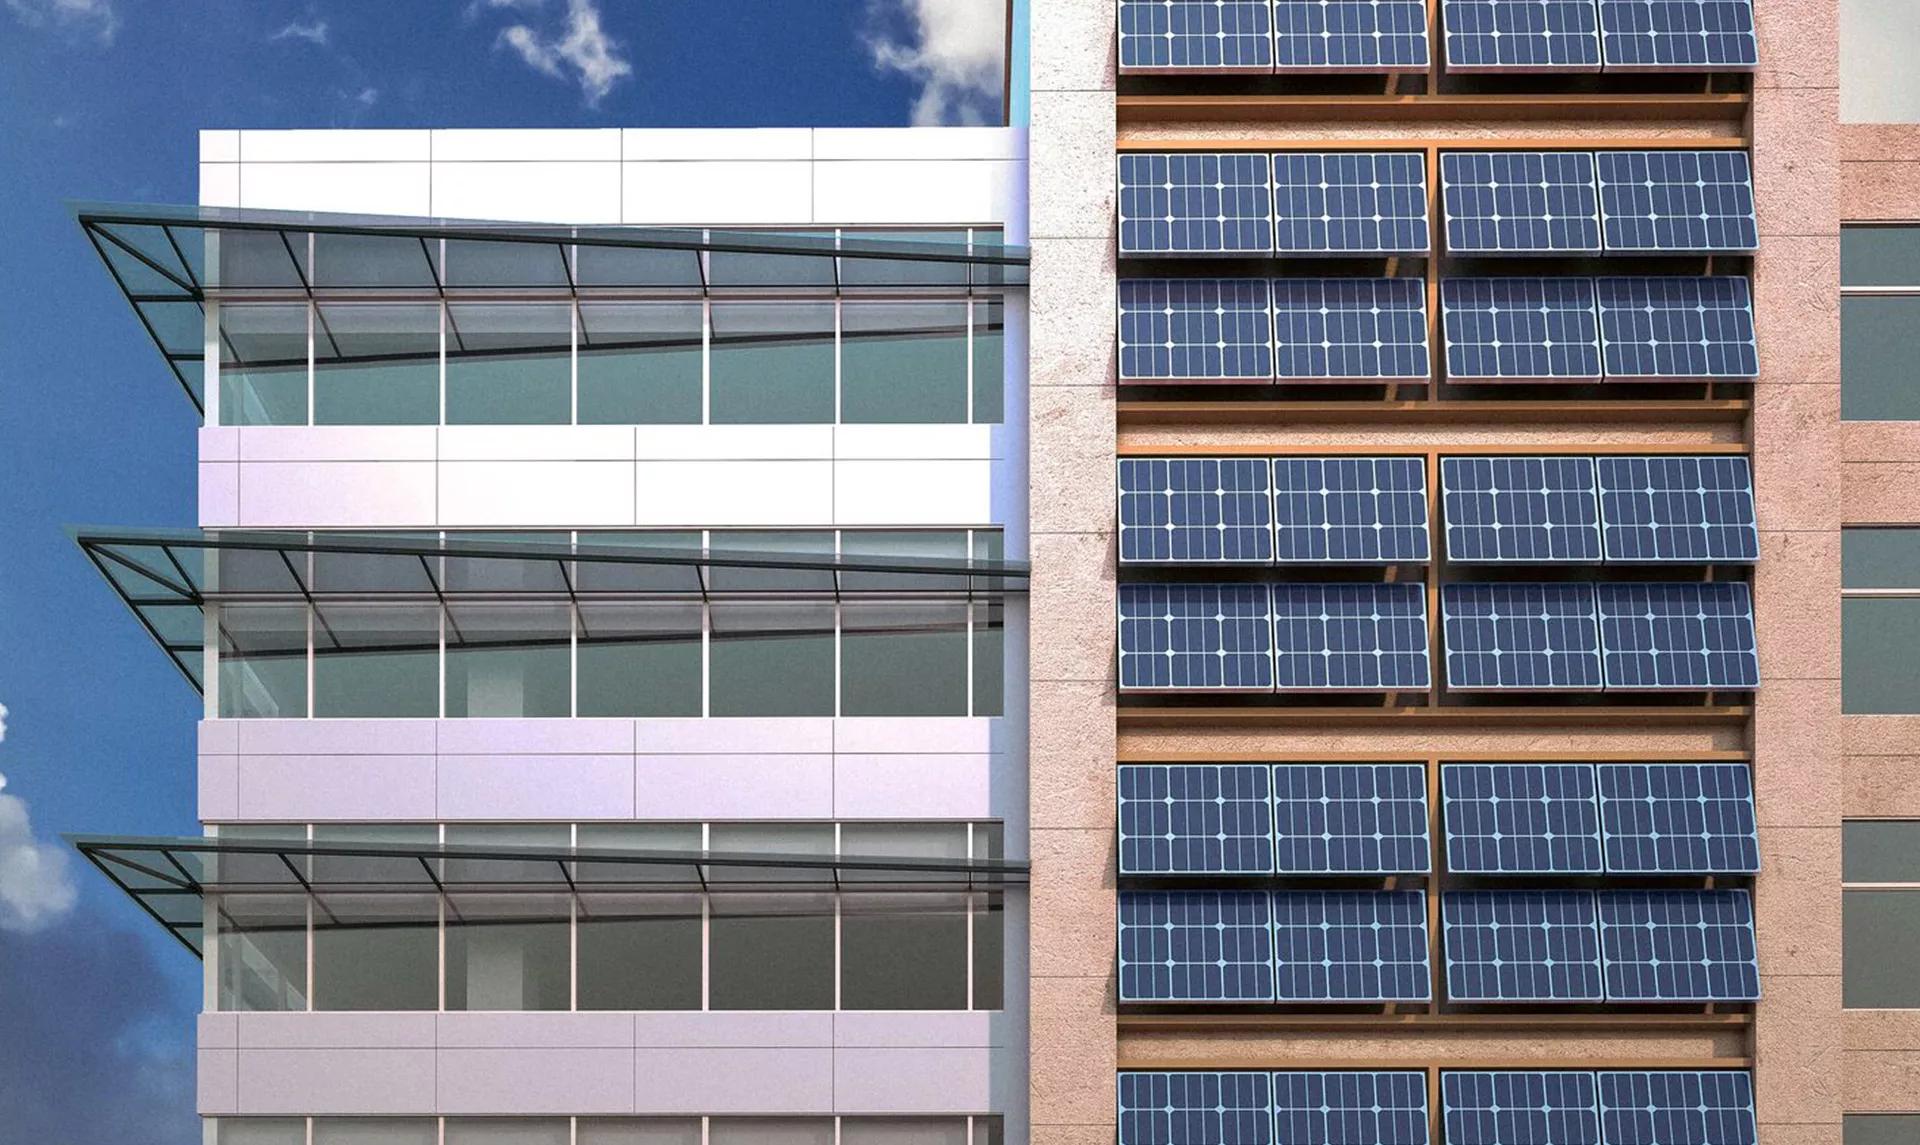 Urban parking garage next to building with solar panels